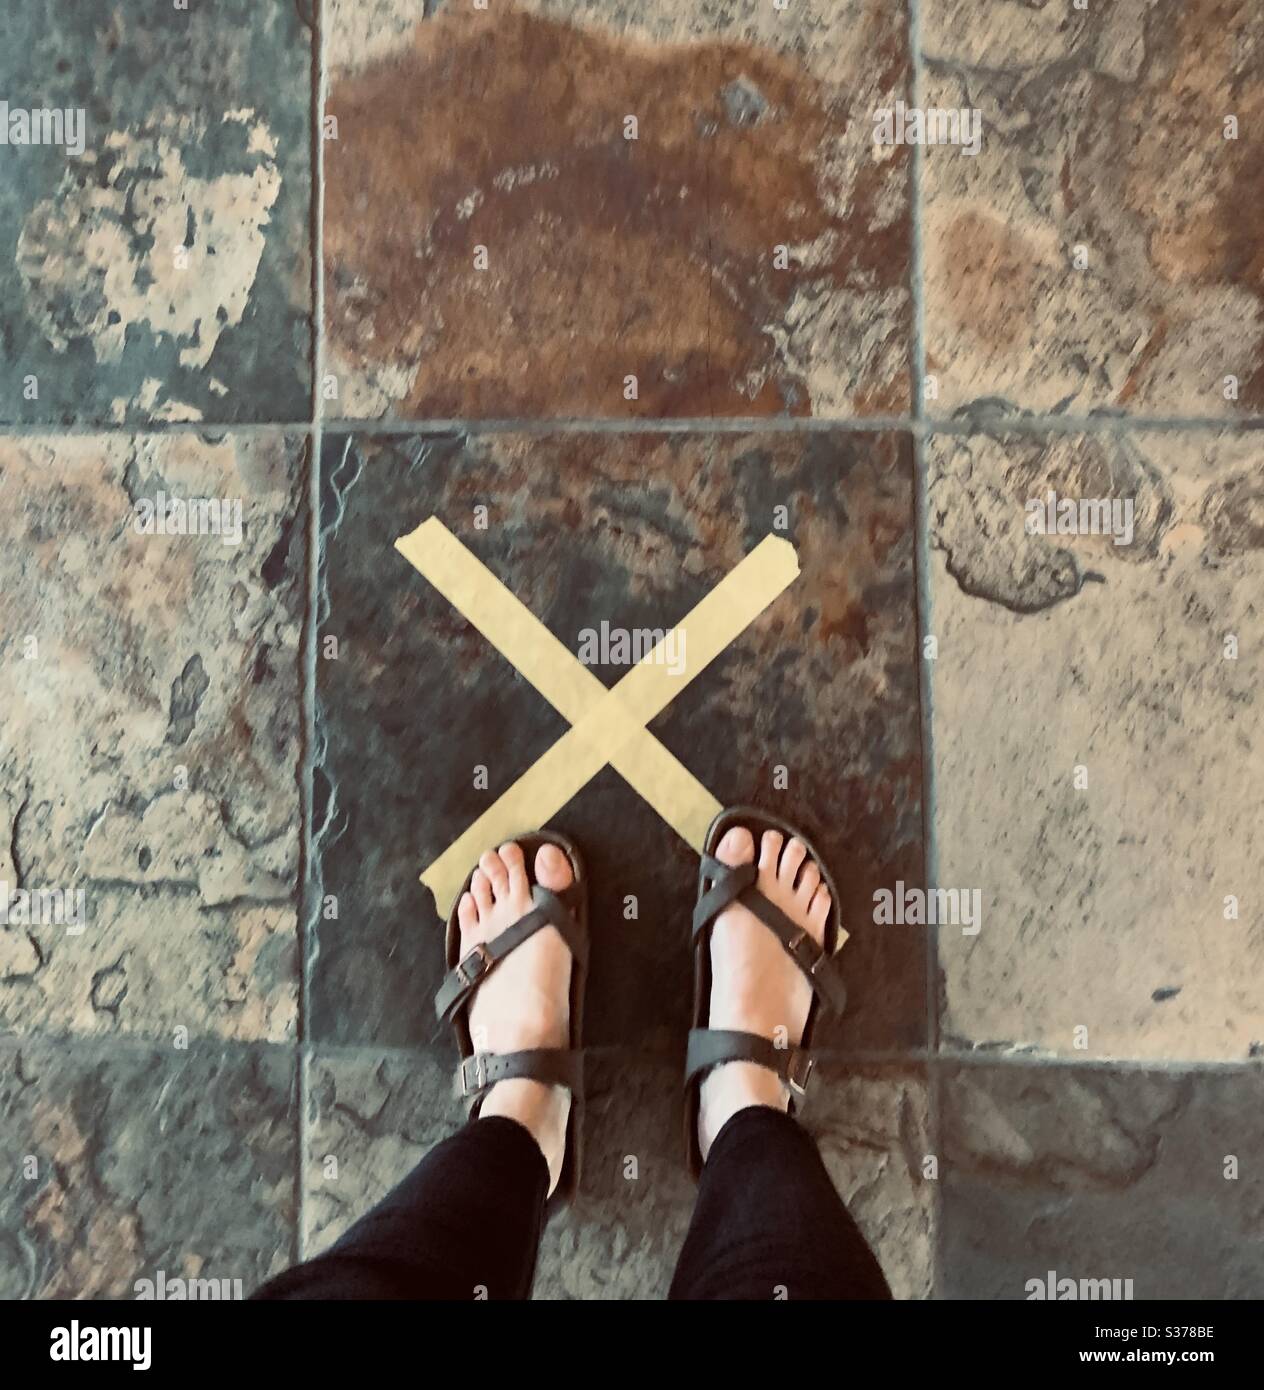 Girl standing on tile floors marked with yellow x during the coronavirus pandemic social distancing USA, America Stock Photo